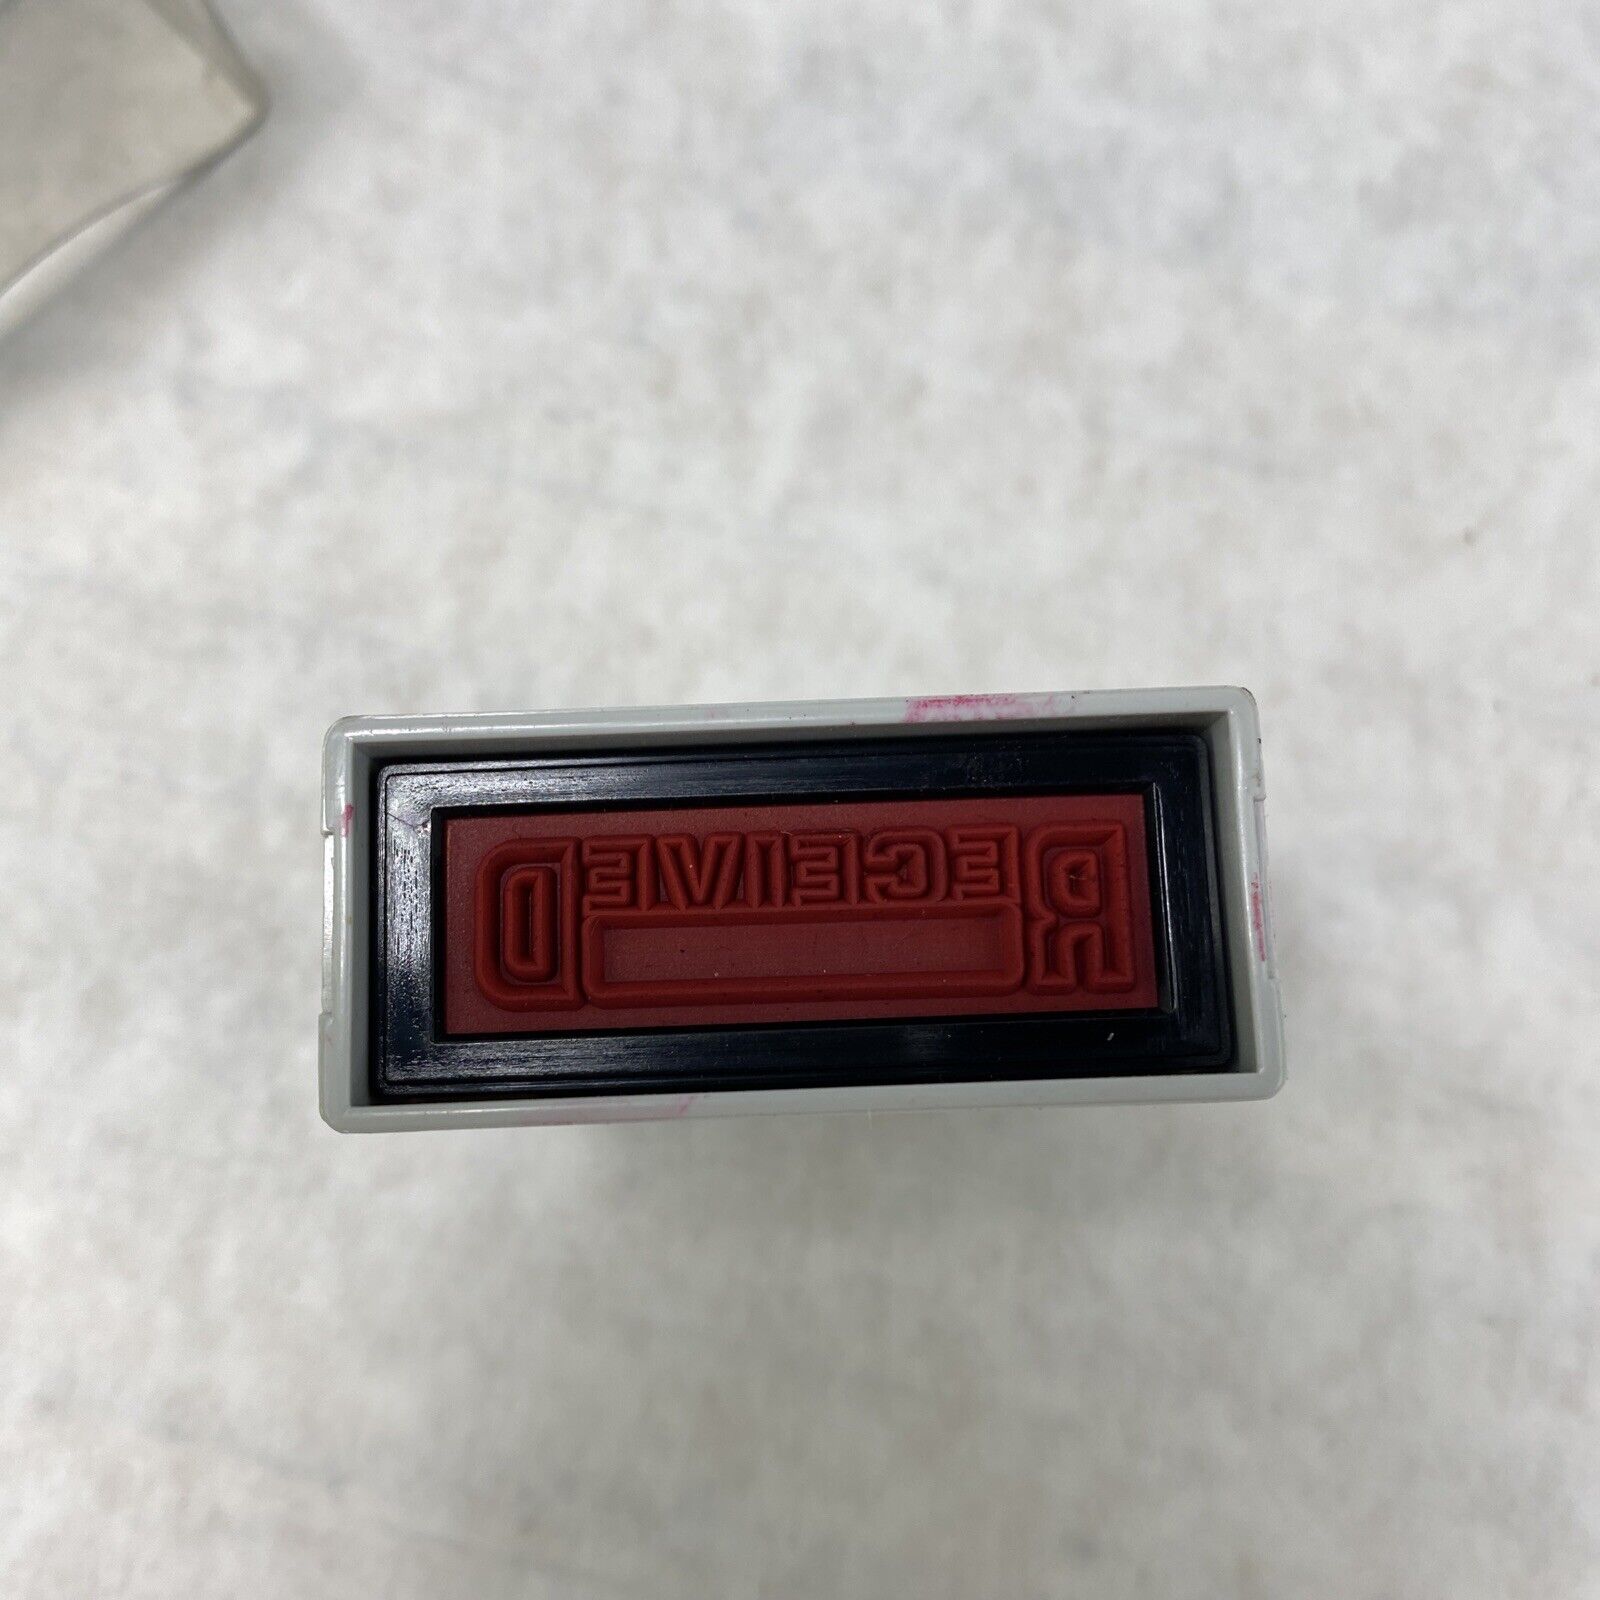 Offistamp Pre-Inked Stamp 1.5" x 3/8" RECEIVED in red ink  USED